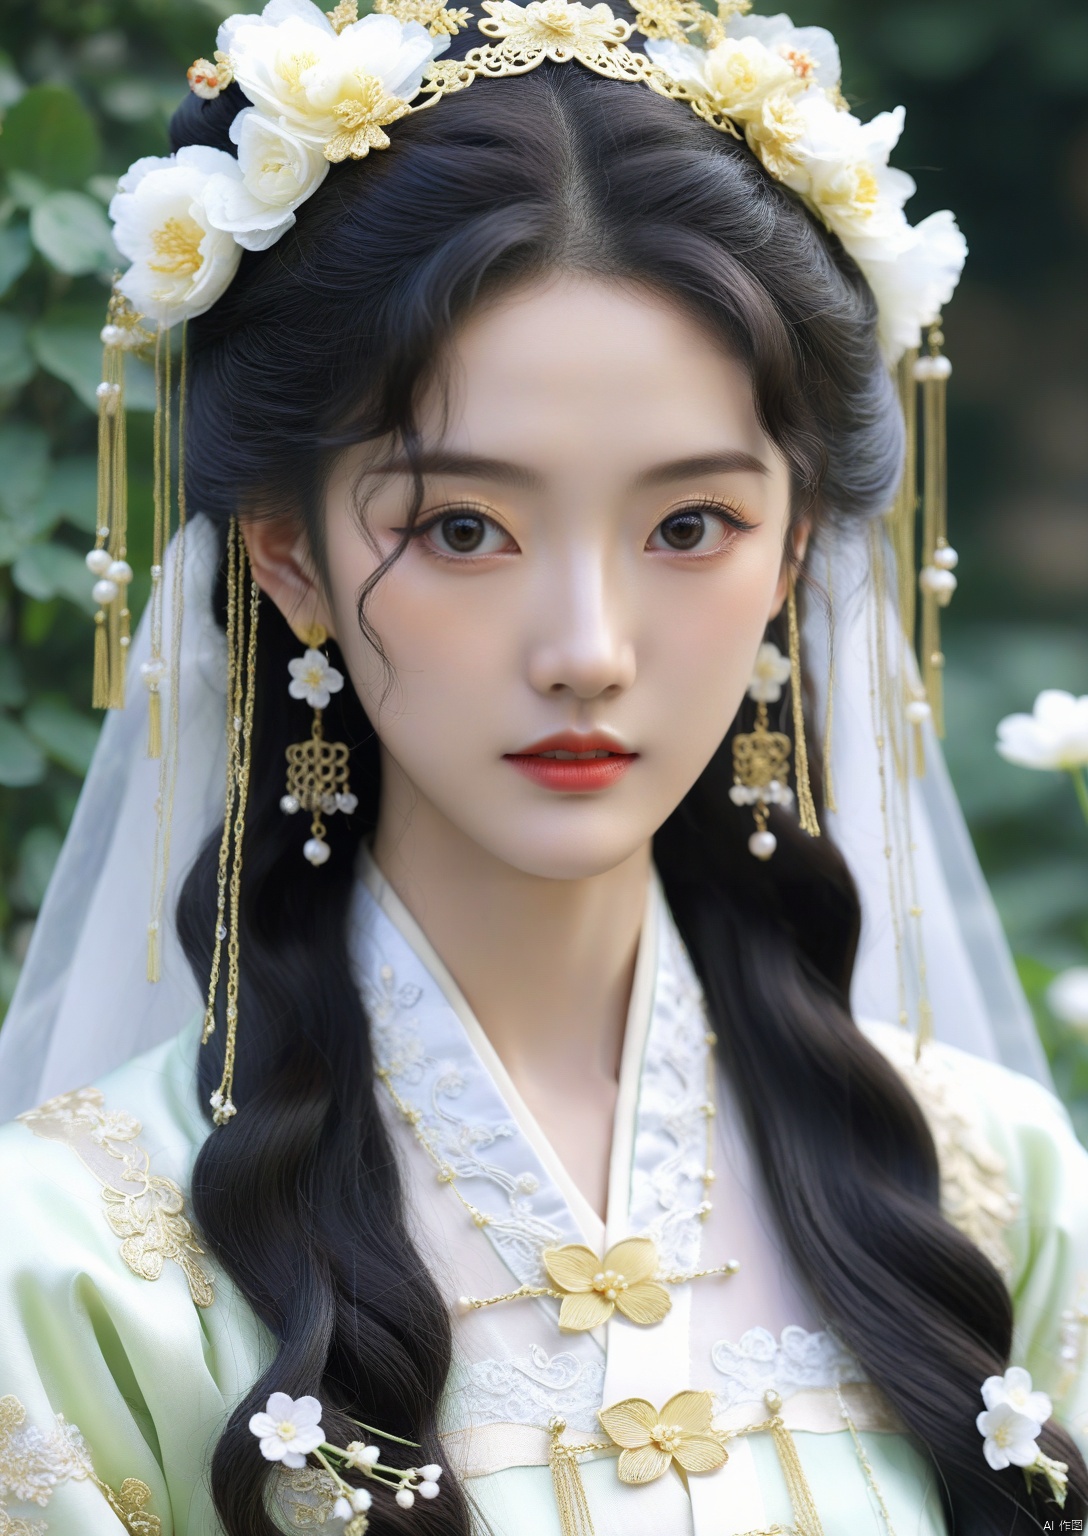  wavy hair wavy hair,Head close-up,Eyes are very delicate,ancient chinese beauties,Gorgeous lace golden white Hanfu,（（（hair accessories）））（（（veil）））,necklace,（（shiny skin））a garden with many flowers,（（（masterpiece）））, （（best quality））,（（intricatedetails））,（（surreal））（8k）,日本, girl,mask,chain